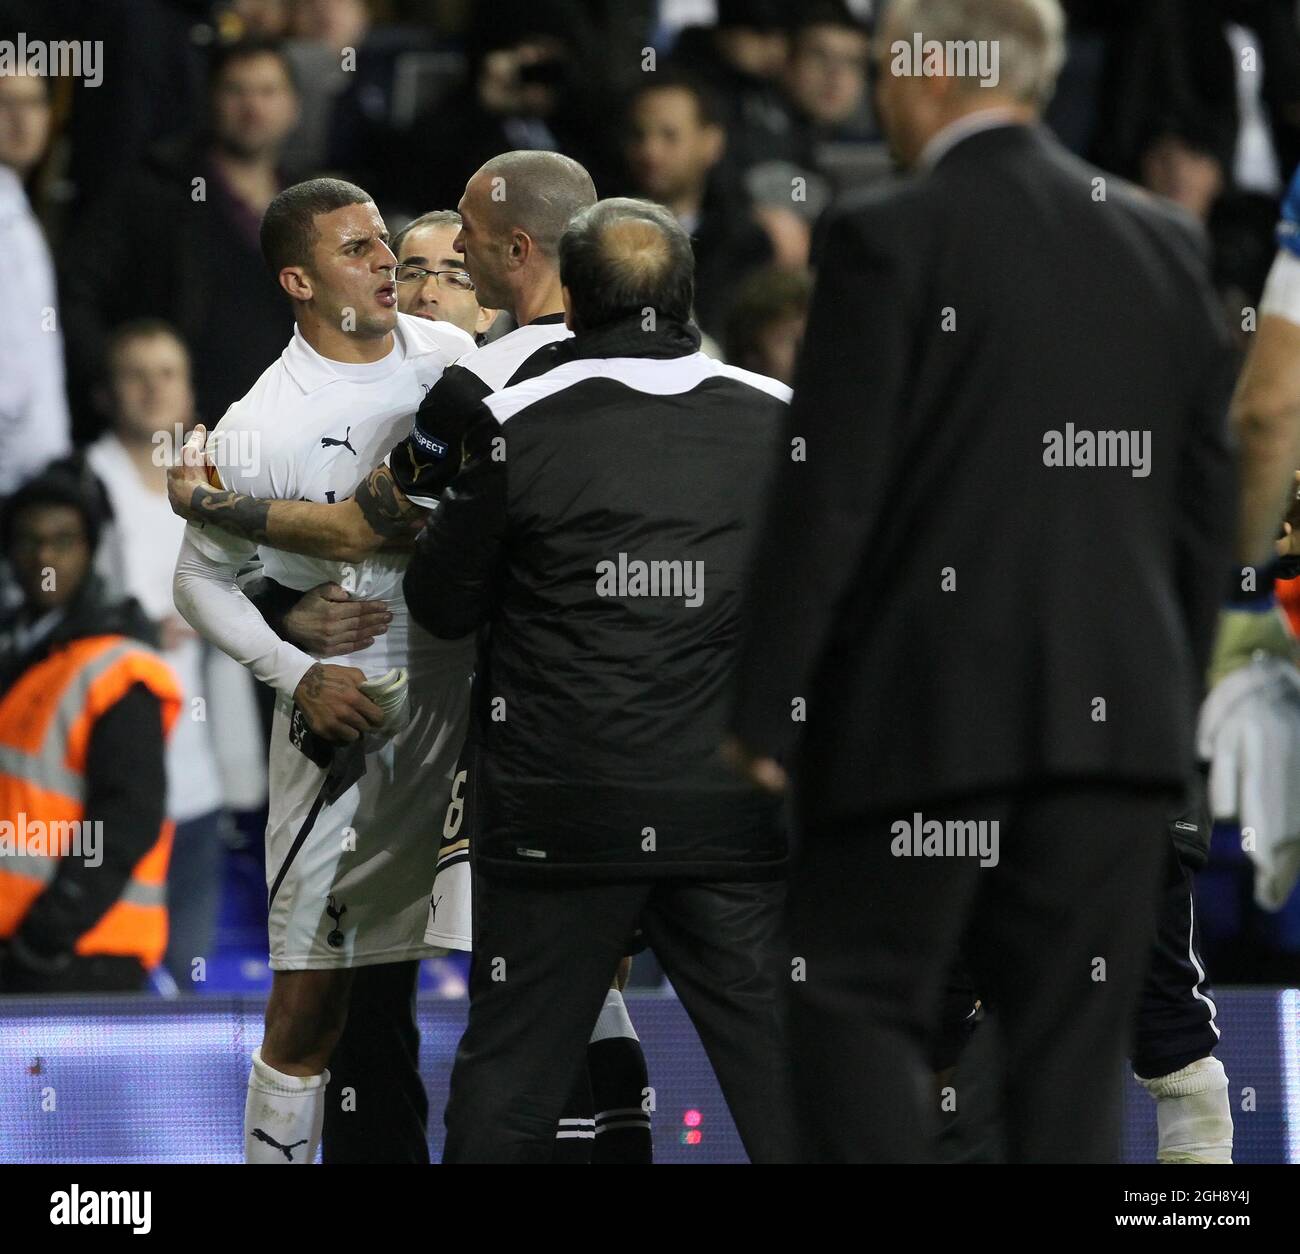 Tottenham's Kyle Walker gets into a fight with PAOK's Dimitris Salpingidis at the final whistle during the UEFA Europa League Group A match between Tottenham Hotspur and PAOK Salonika on 30th November, 2011. Stock Photo